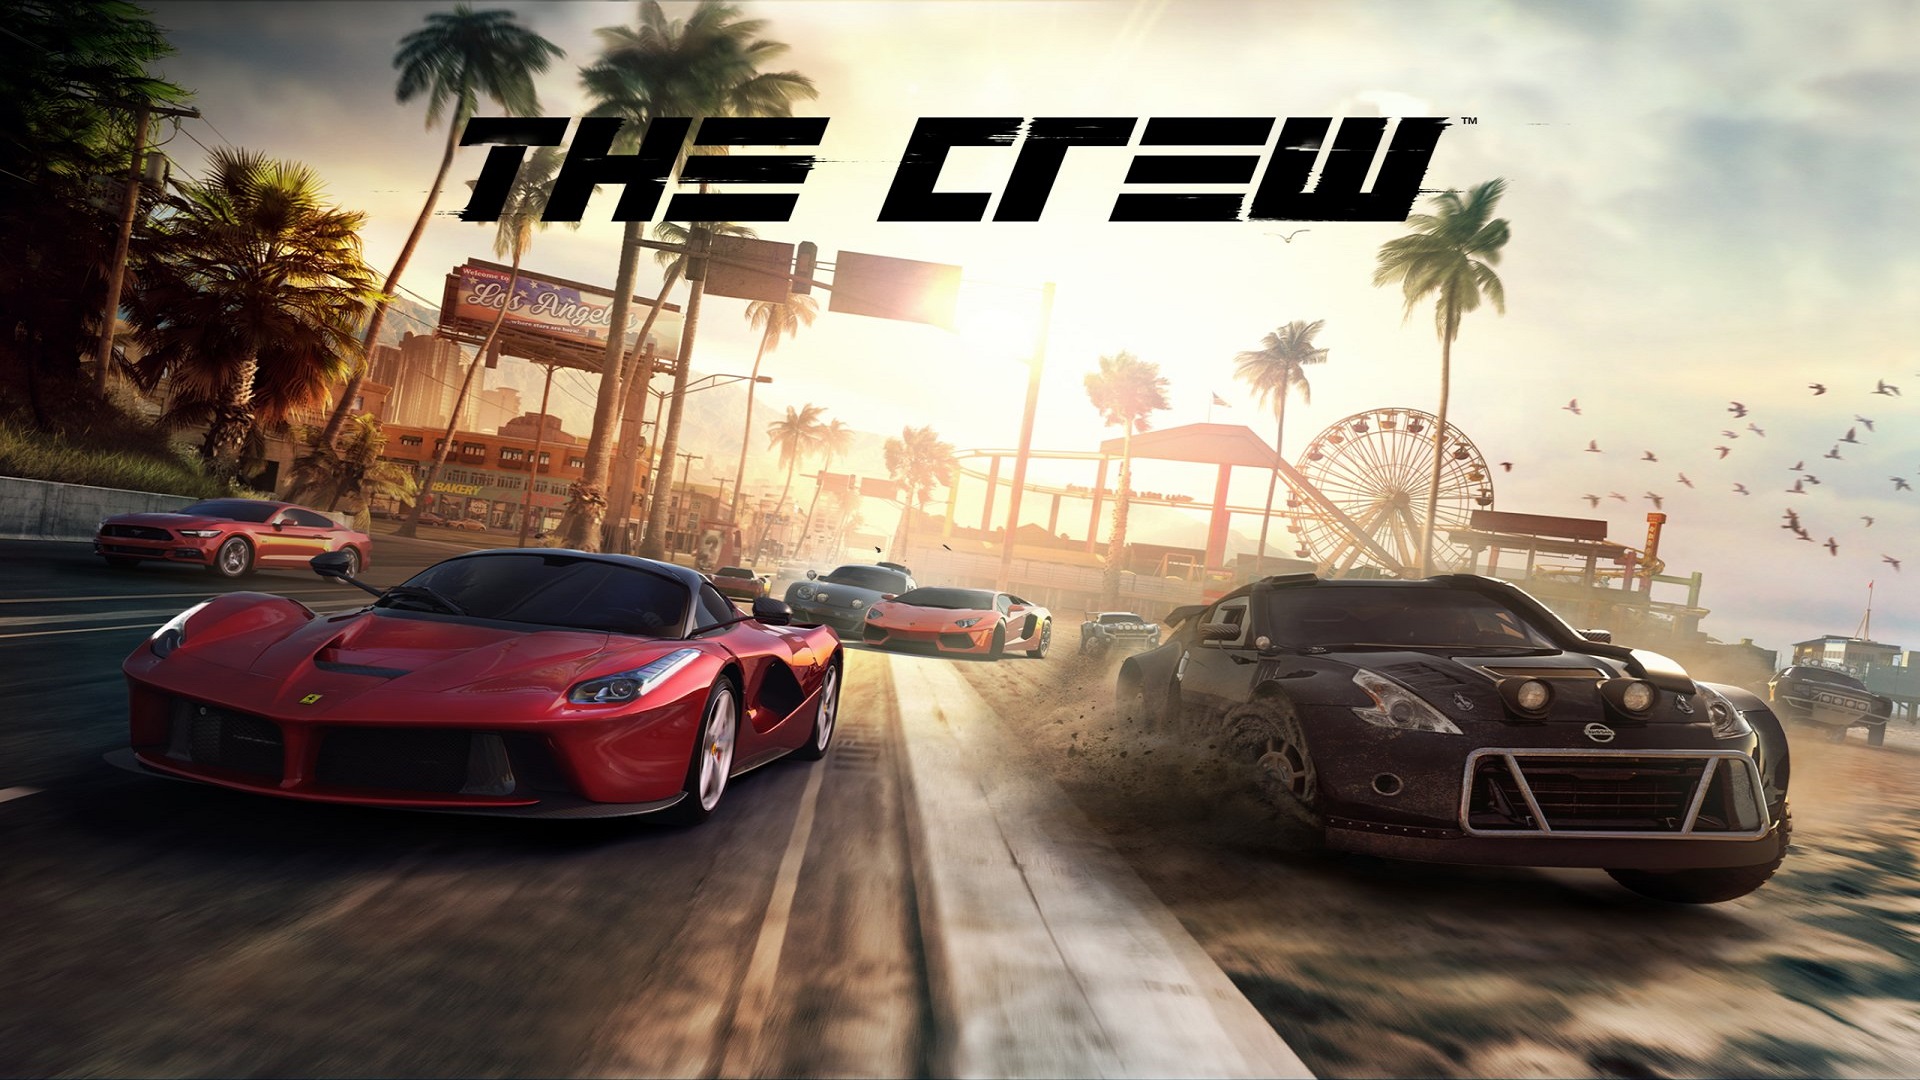 The Crew hot hd wallpapers1920 x 1080